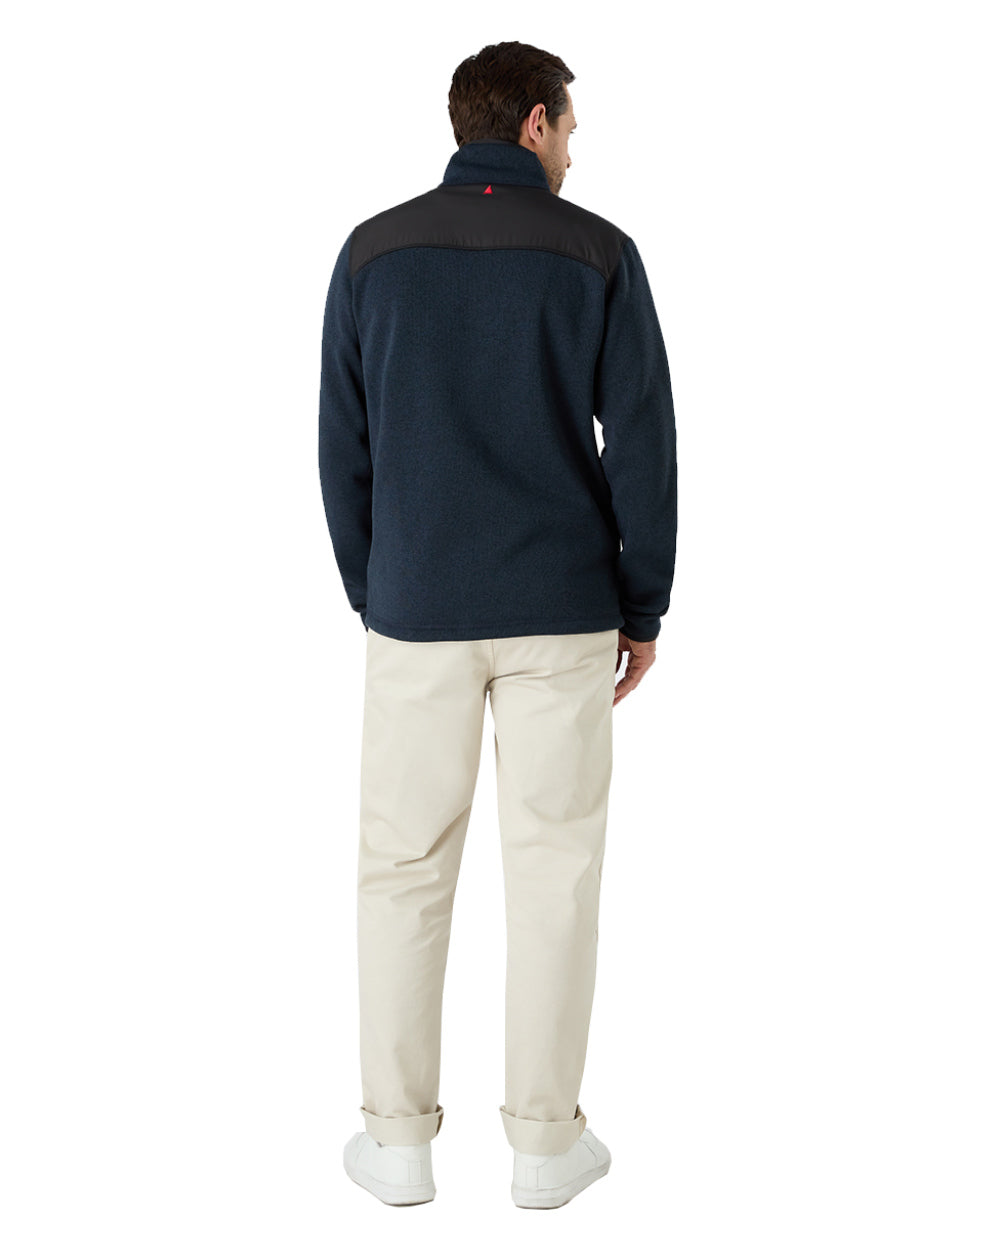 True Navy Marl Coloured Musto Mens Knitted Fleece On A White Background 